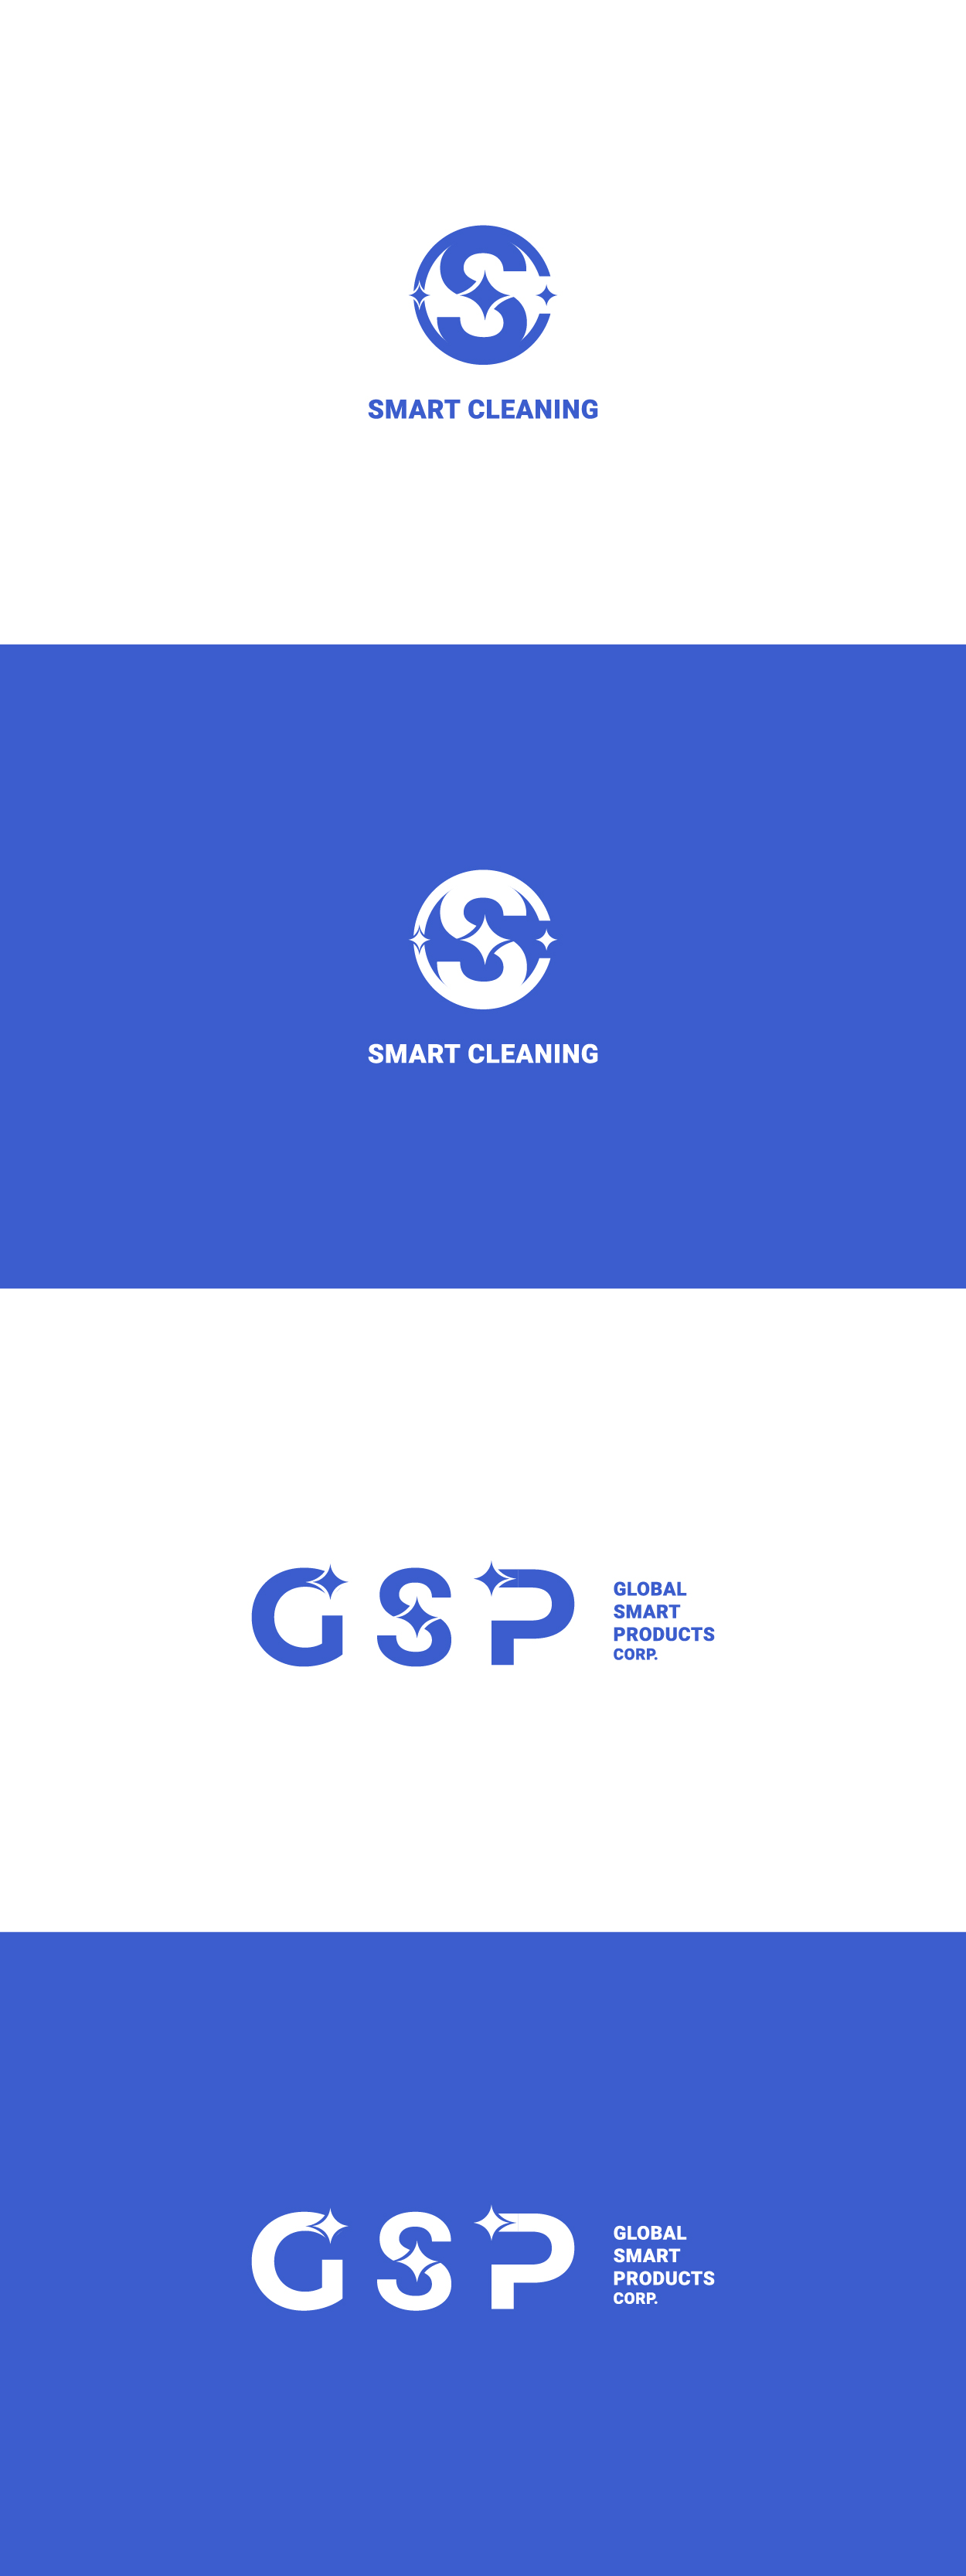 Global Smart Products Corp.4.jpg